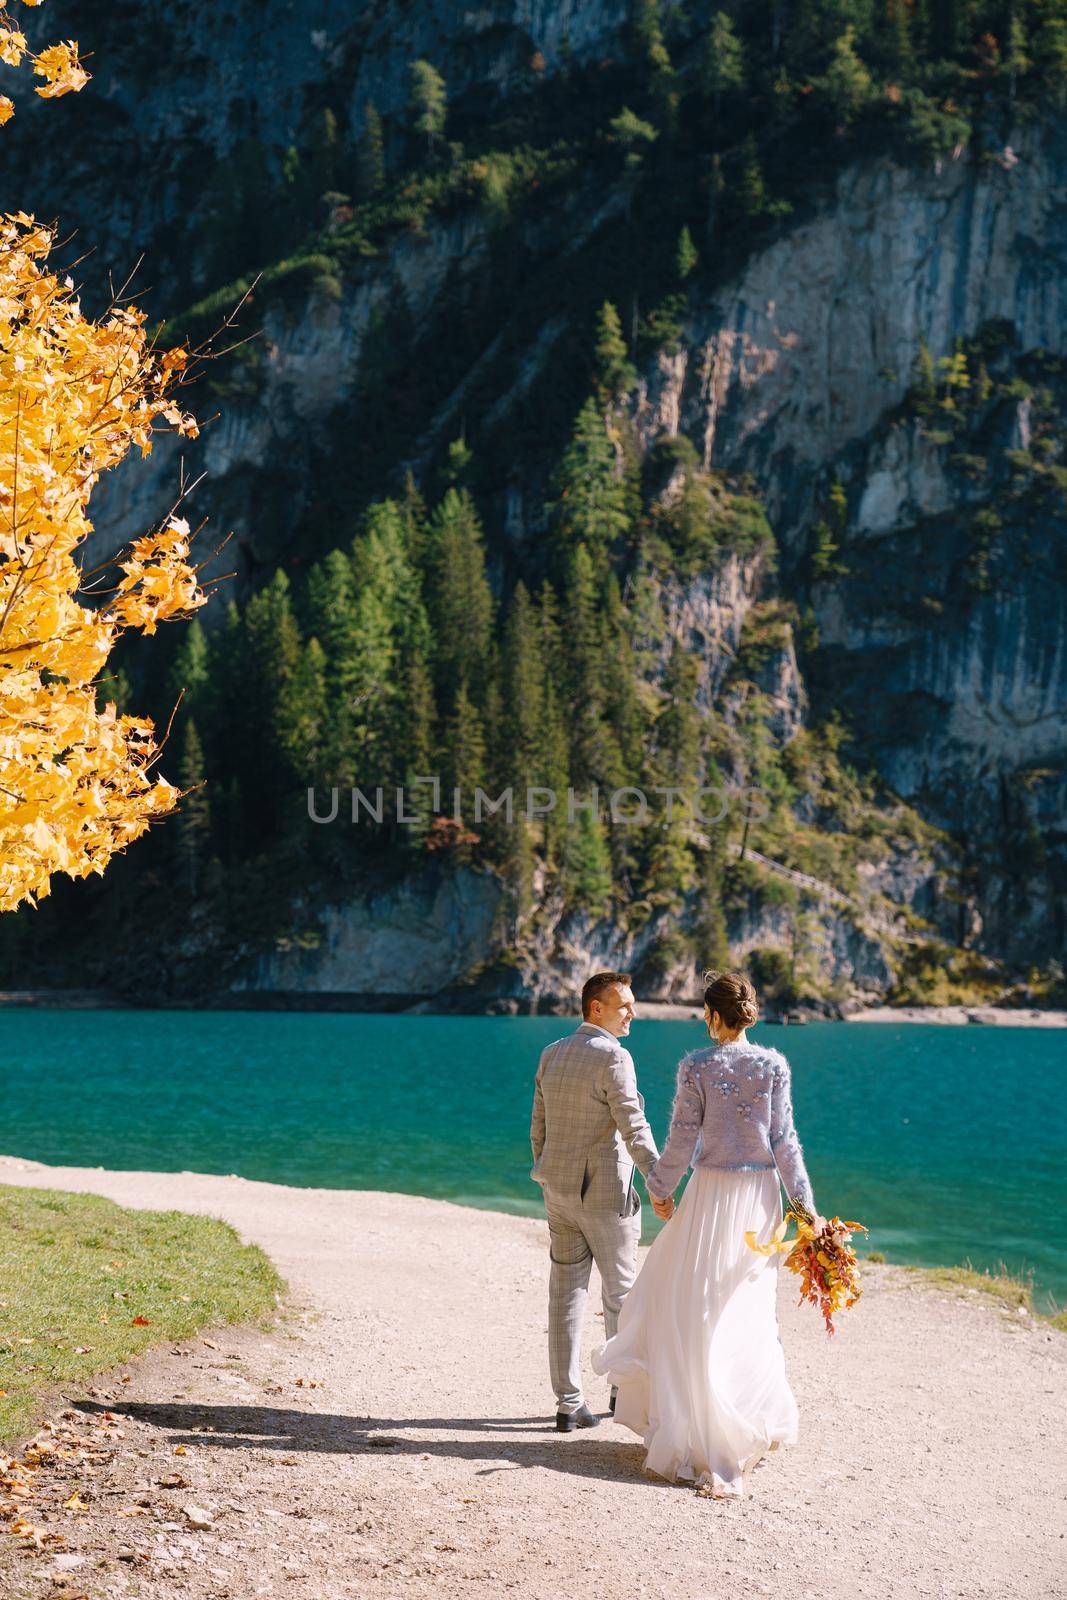 Bride and groom under autumn tree, with fiery yellow foliage, at Lago di Braies in Italy. Destination wedding in Europe, at Braies lake. In love newlyweds run after each other.